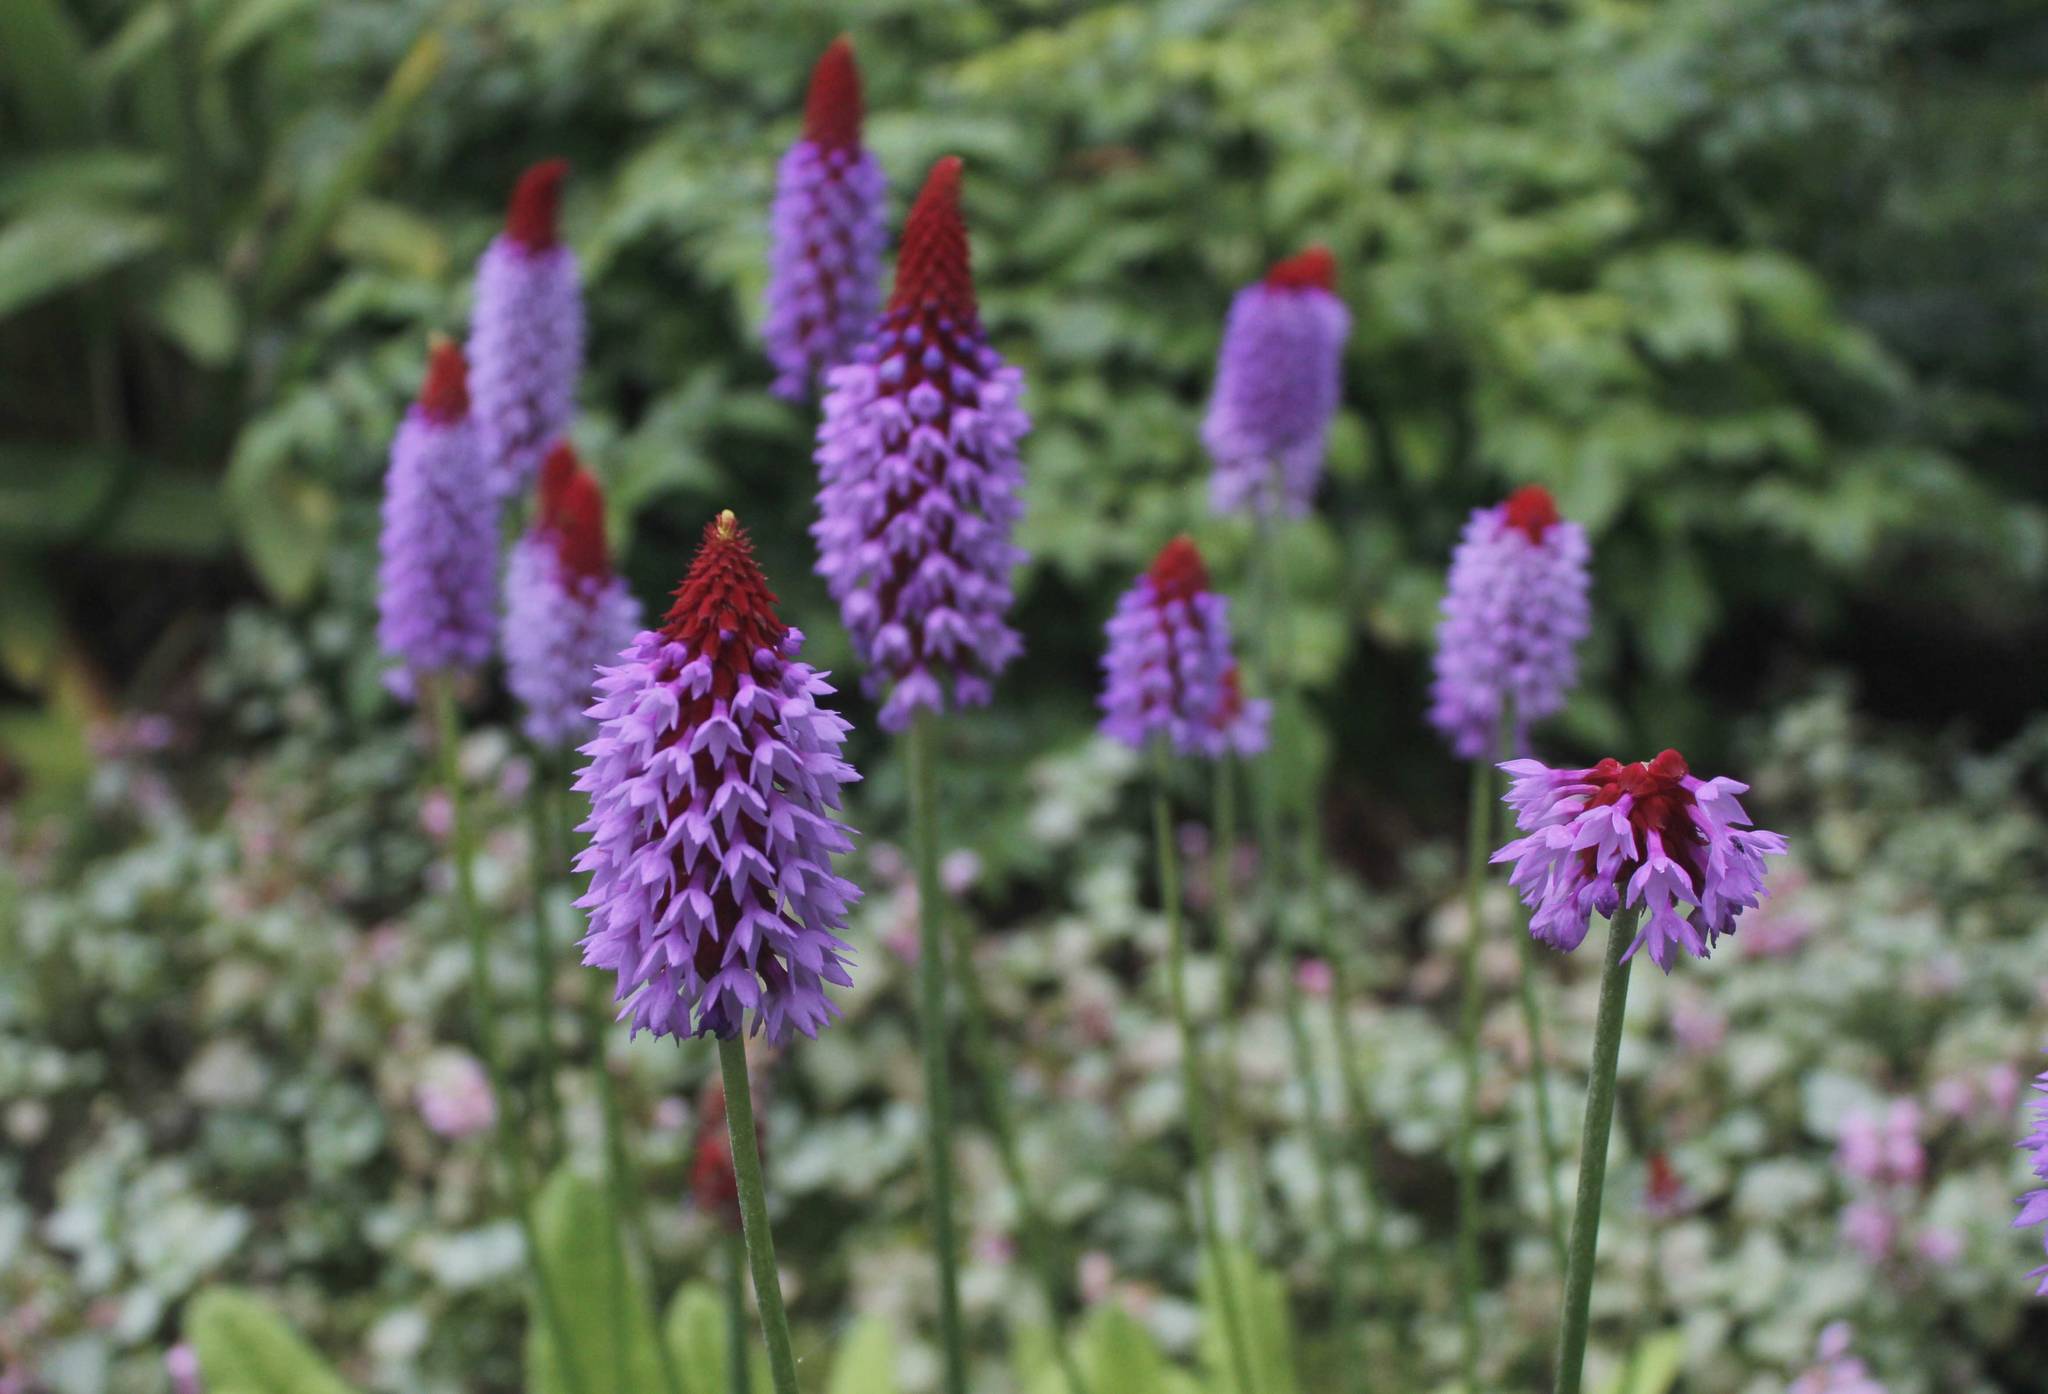 A Primula vialii blooms in the Jensen-Olson Arboretum on Tuesday, July 25, 2017. The arboretum boasts North America’s largest primula (primrose) collection, with about 200 varieties. (Alex McCarthy | Juneau Empire)